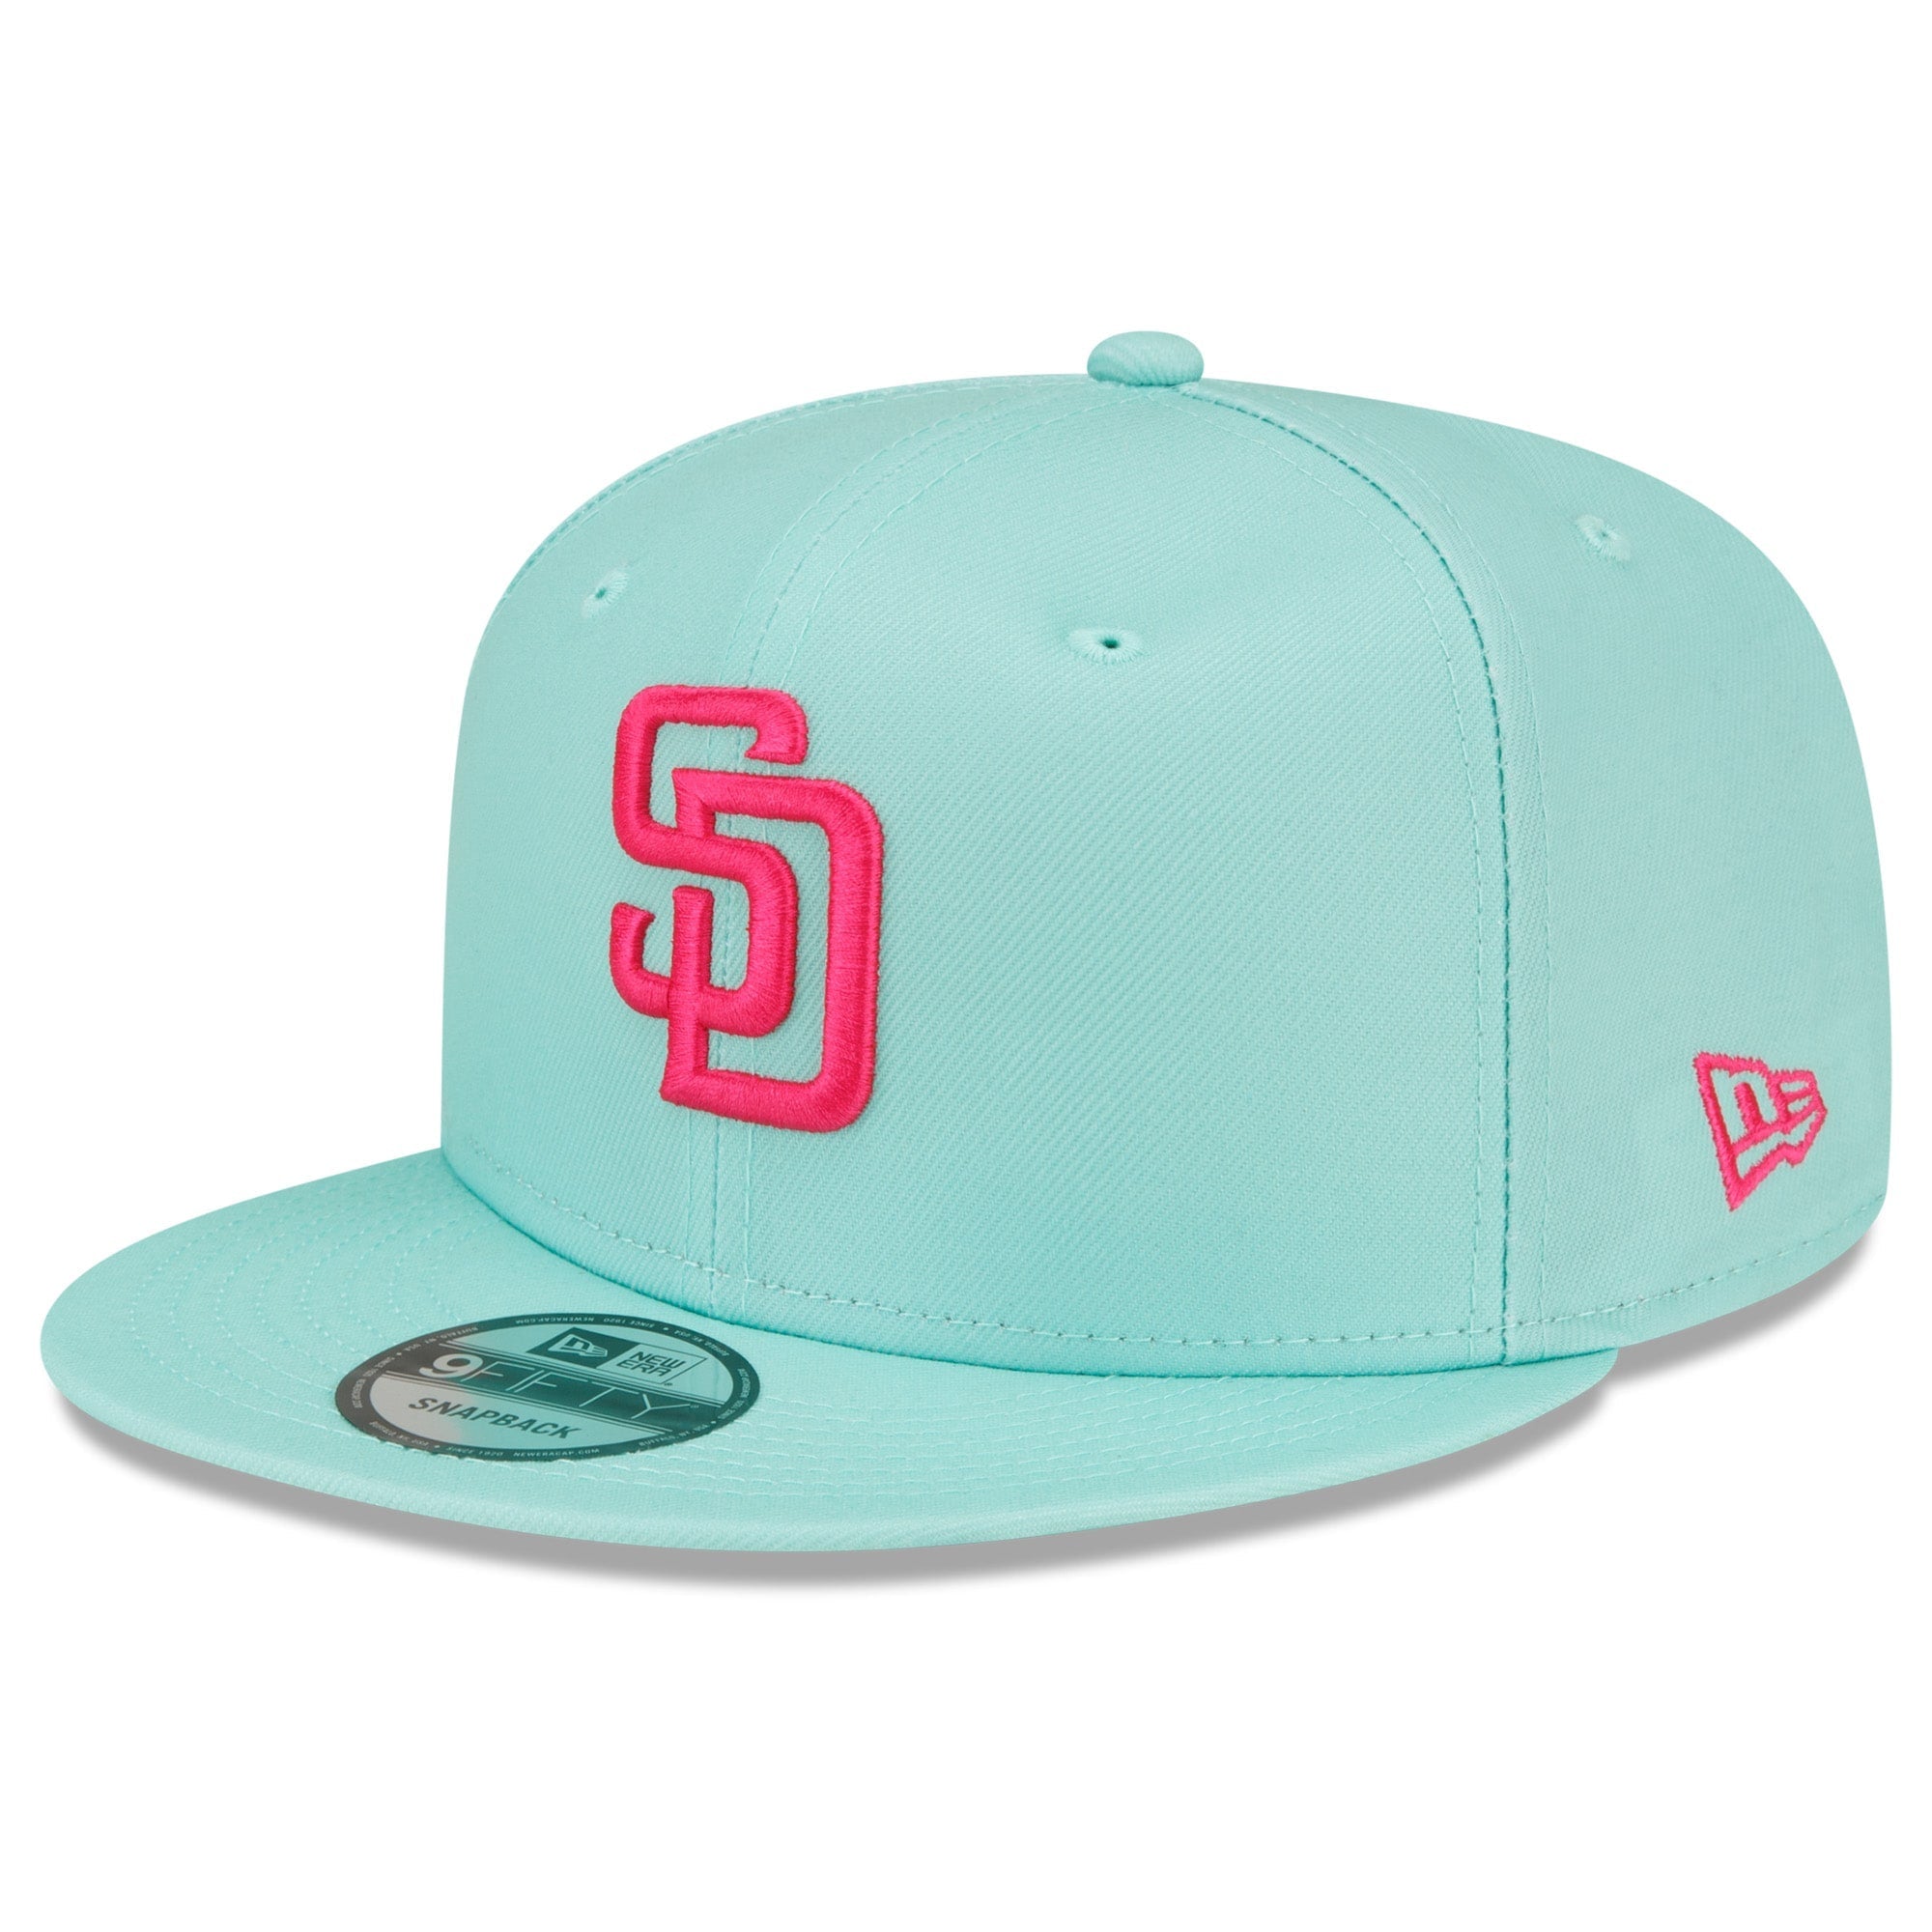 New Era San Diego Padres City Connect 9FIFTY Snapback Adjustable Hat